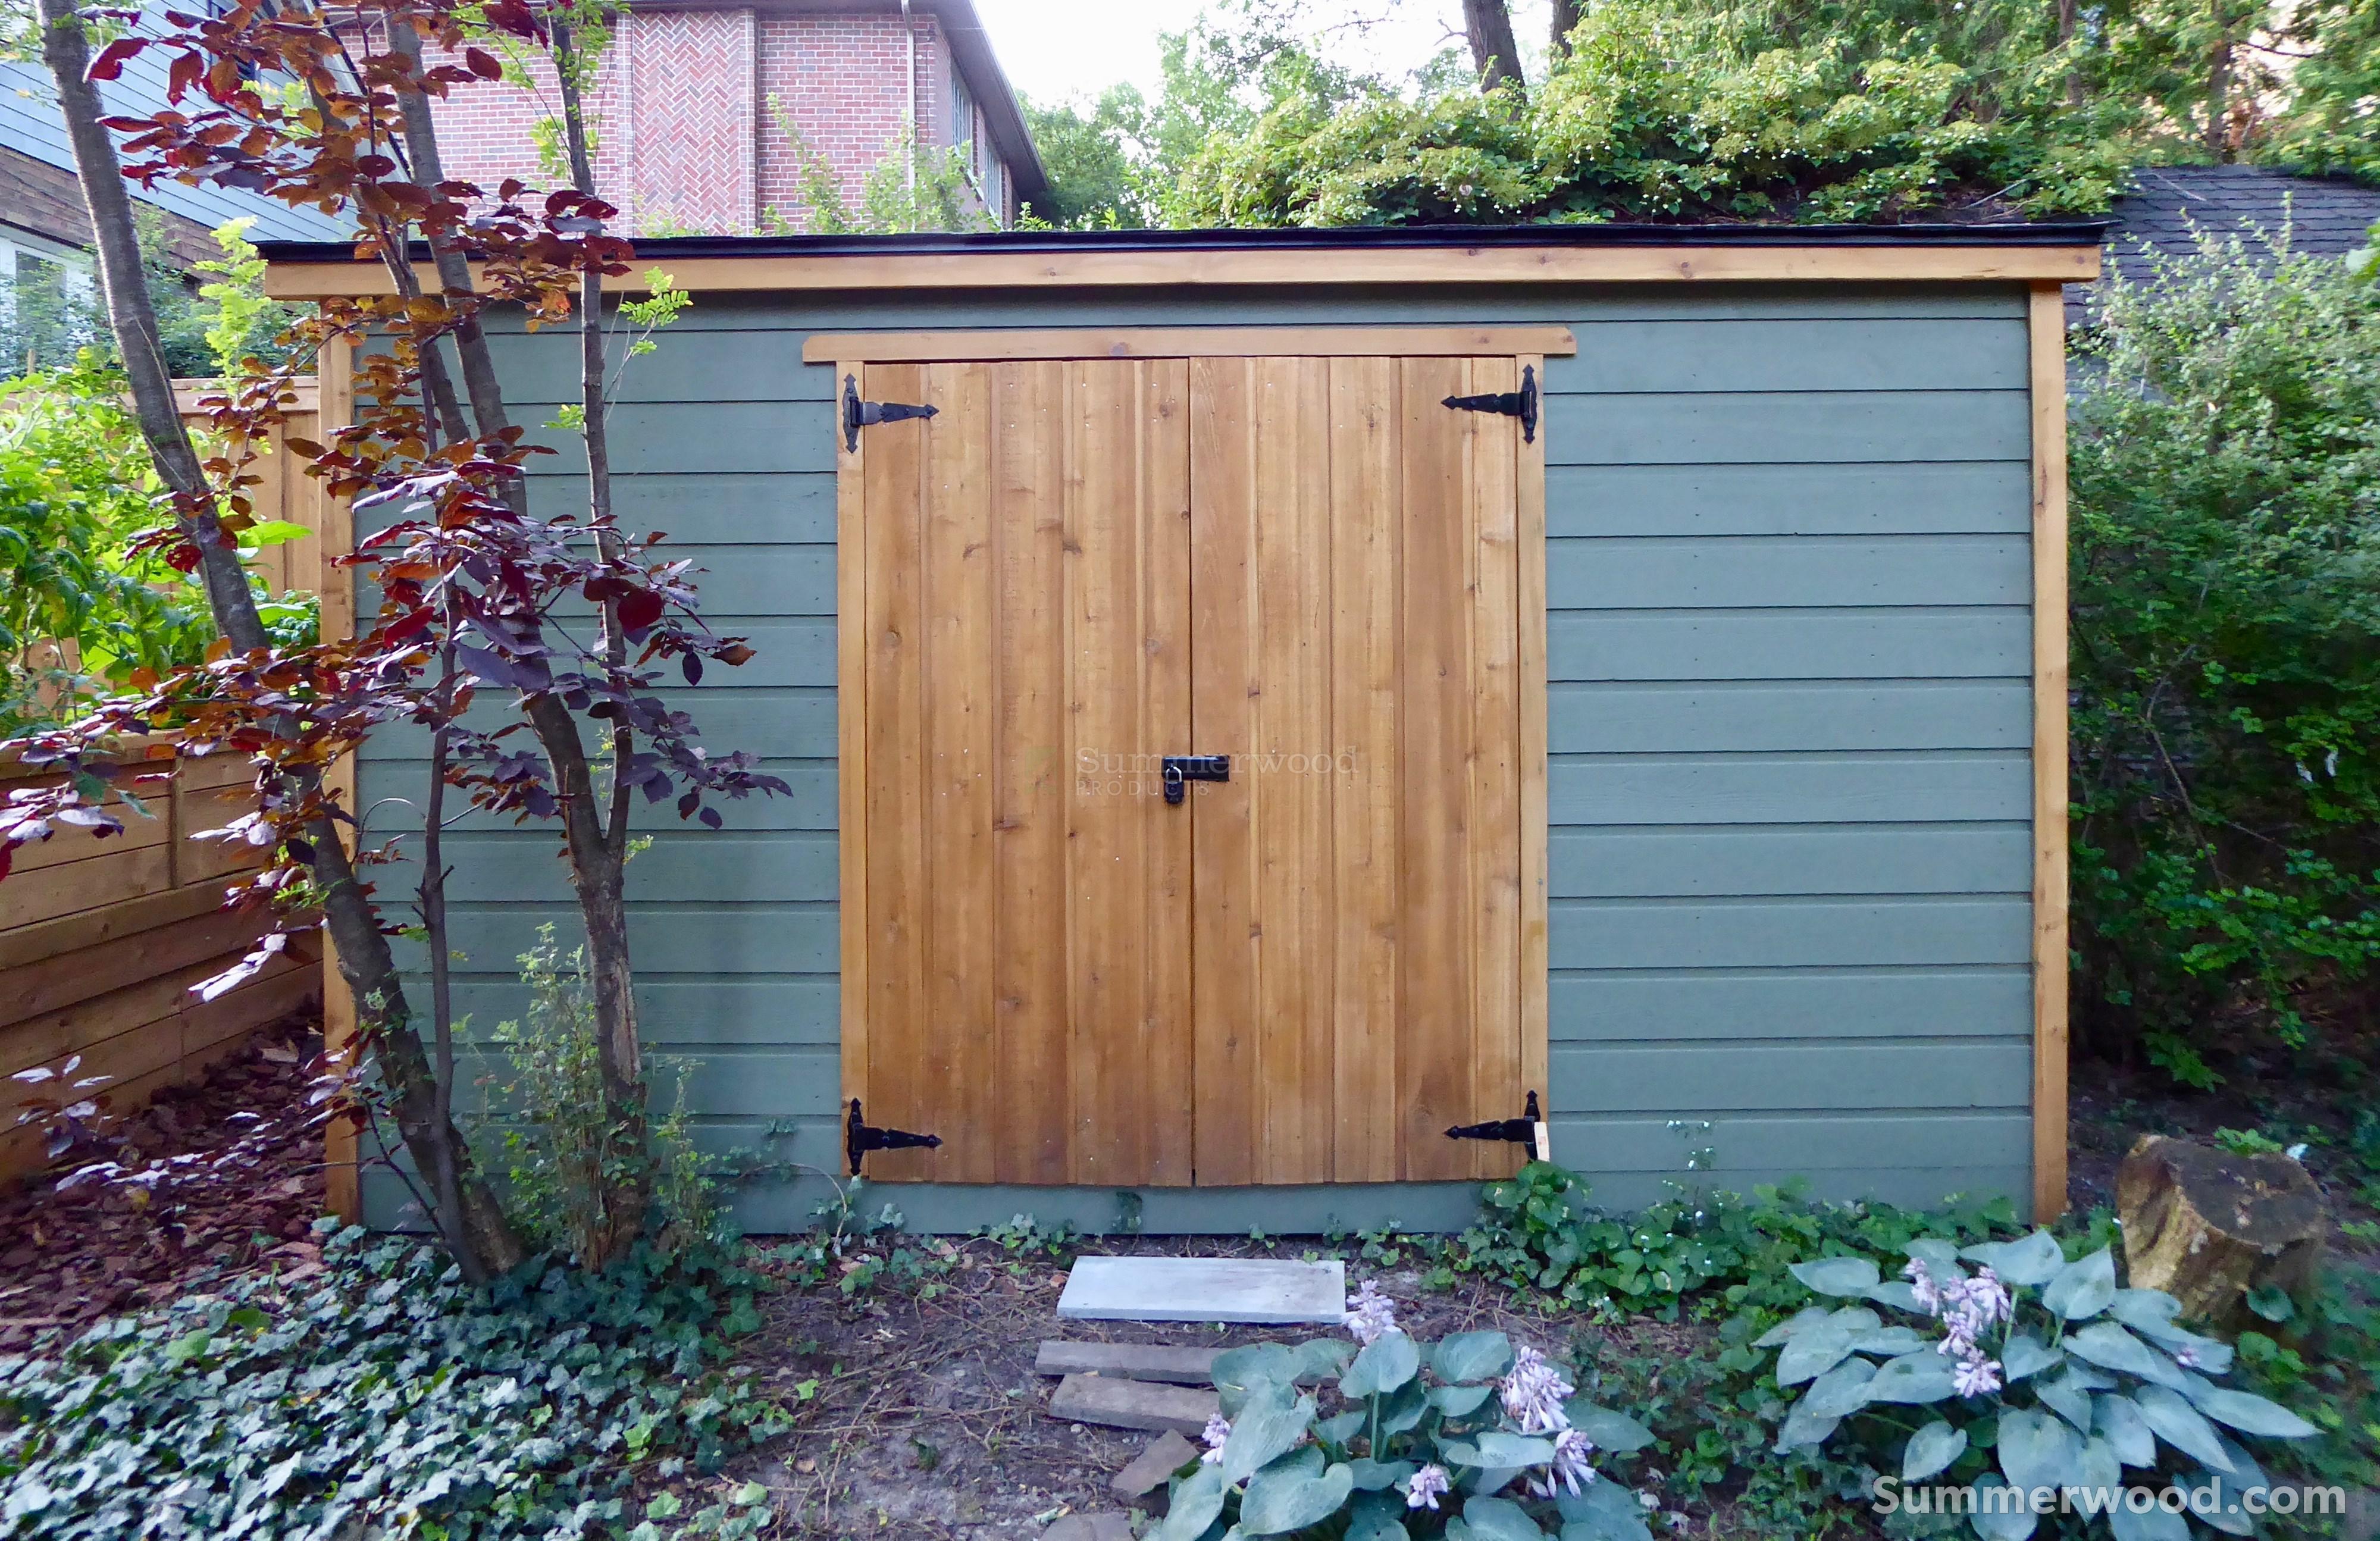 Cedar Sarawak outdoor shed 6 x 13 with double doors in Toronto, ON. ID number 217687-2